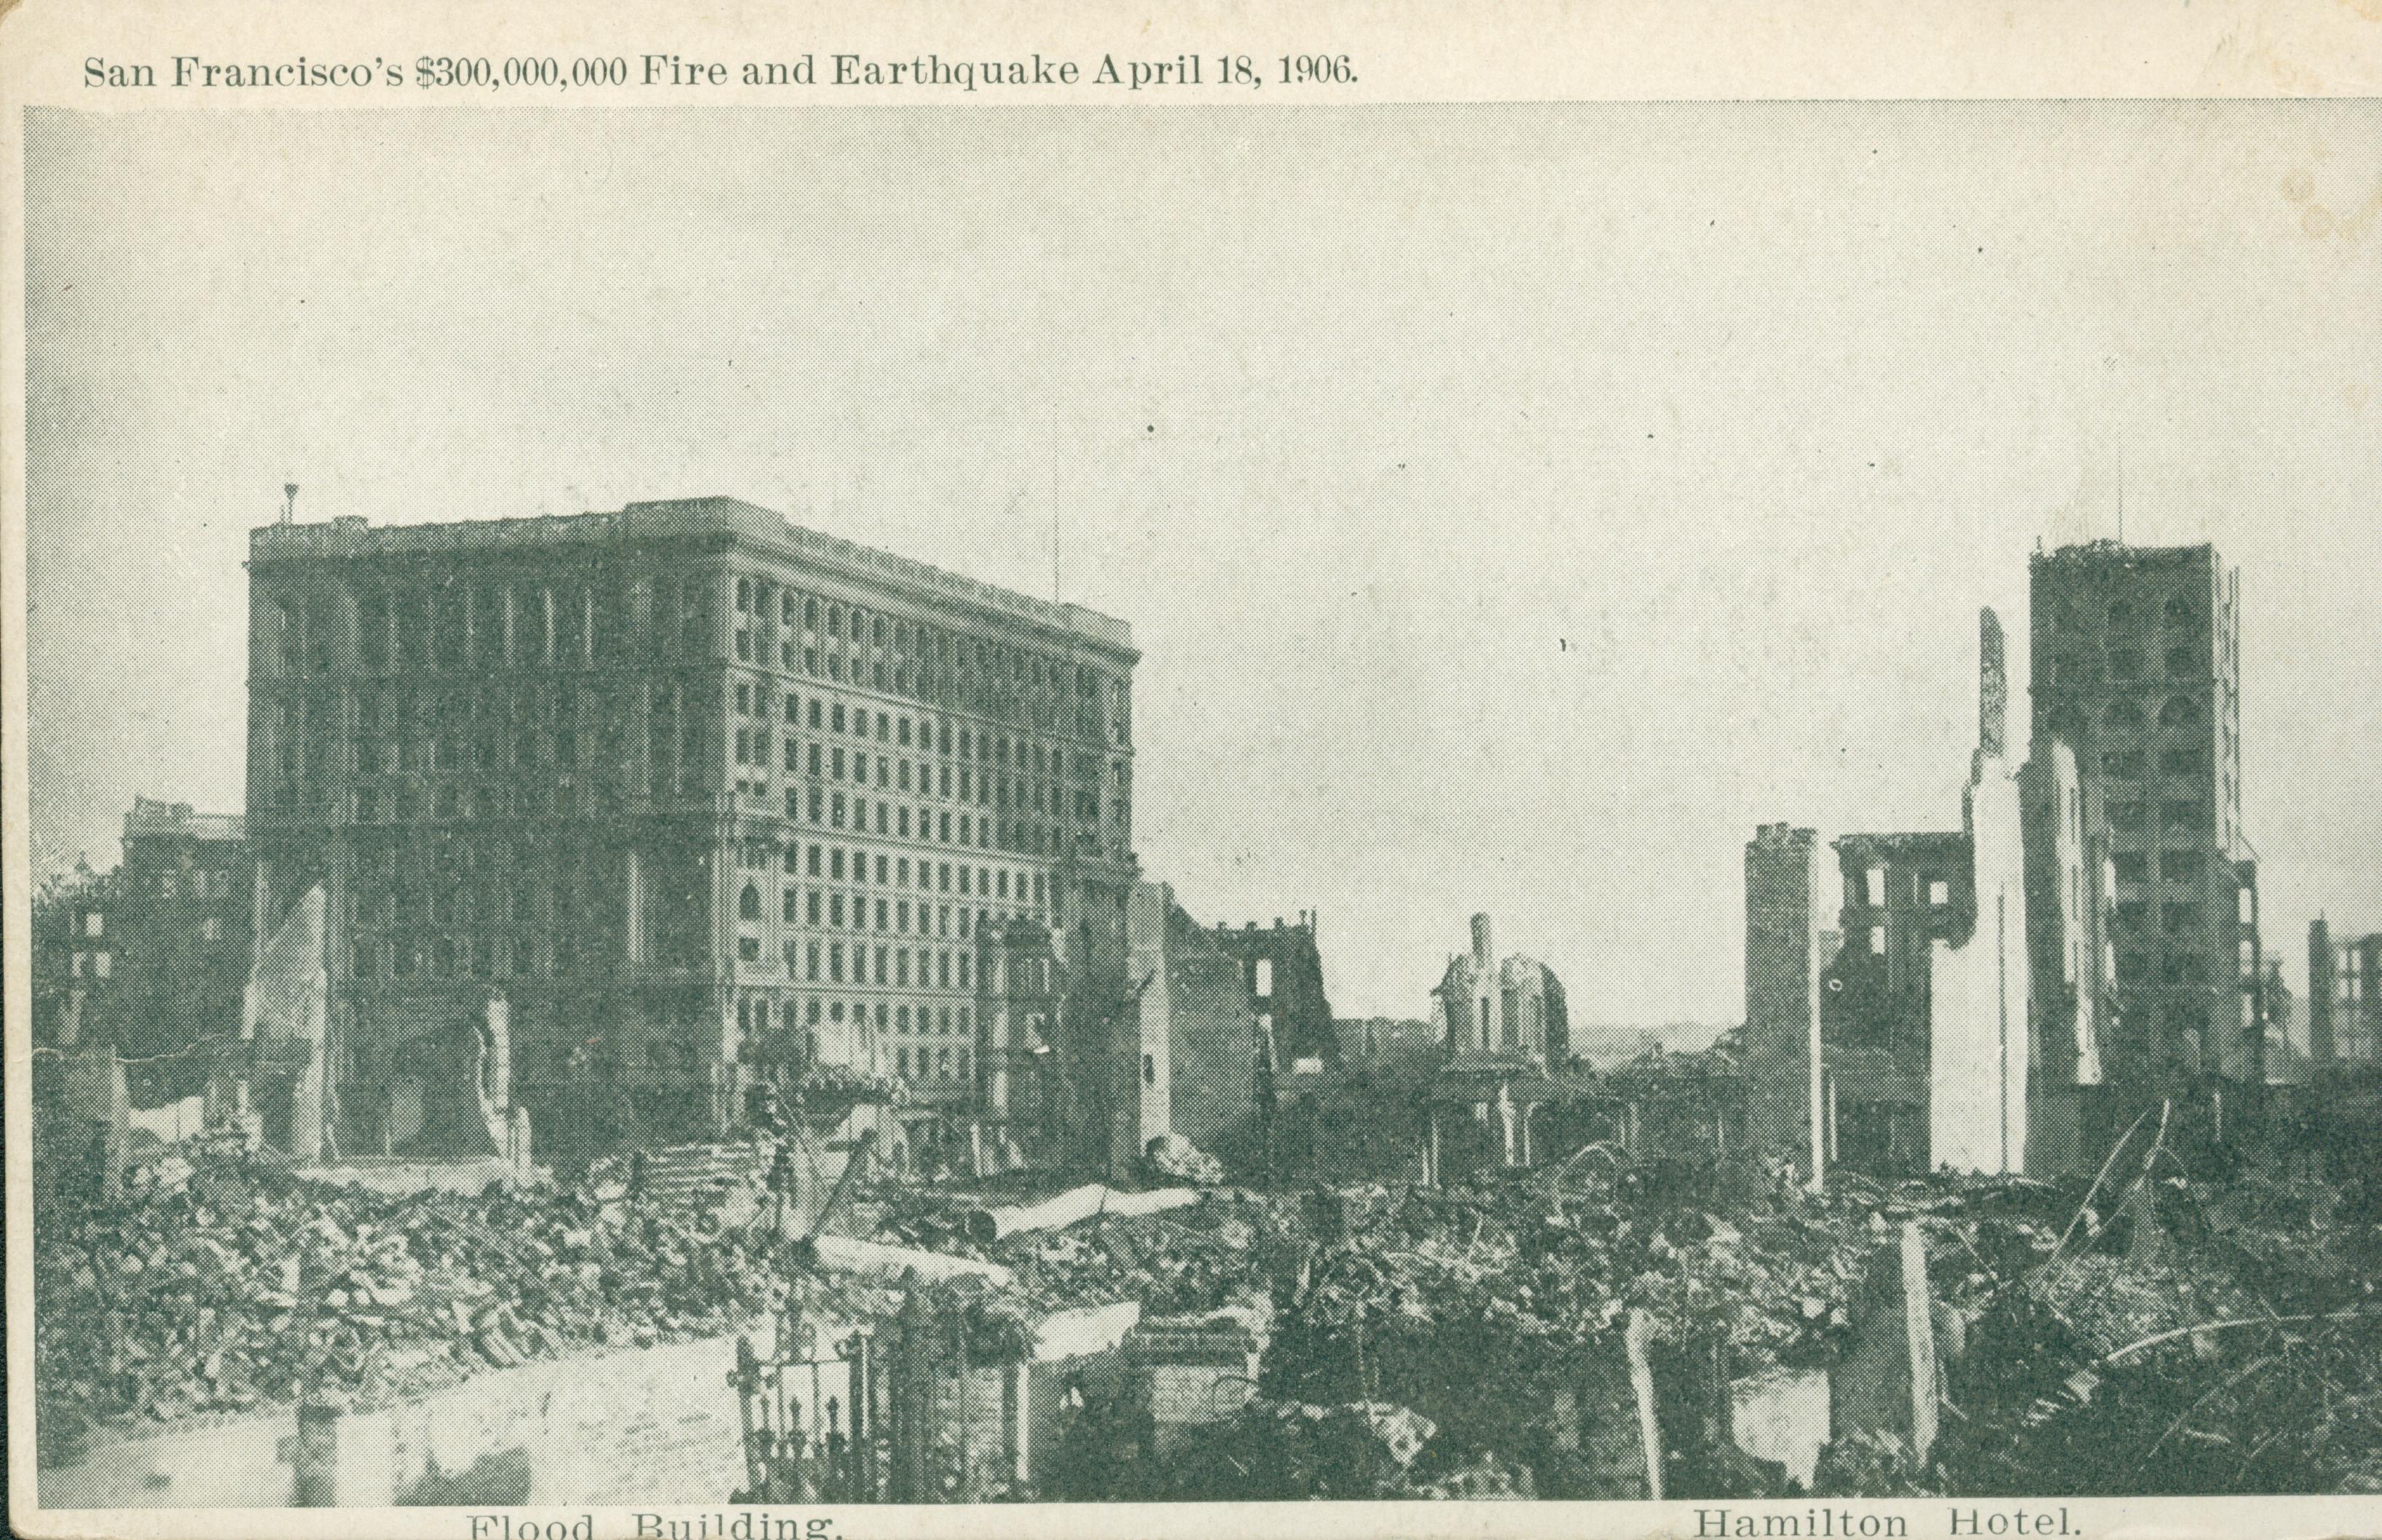 Shows the ruins of several buildings after the earthquake